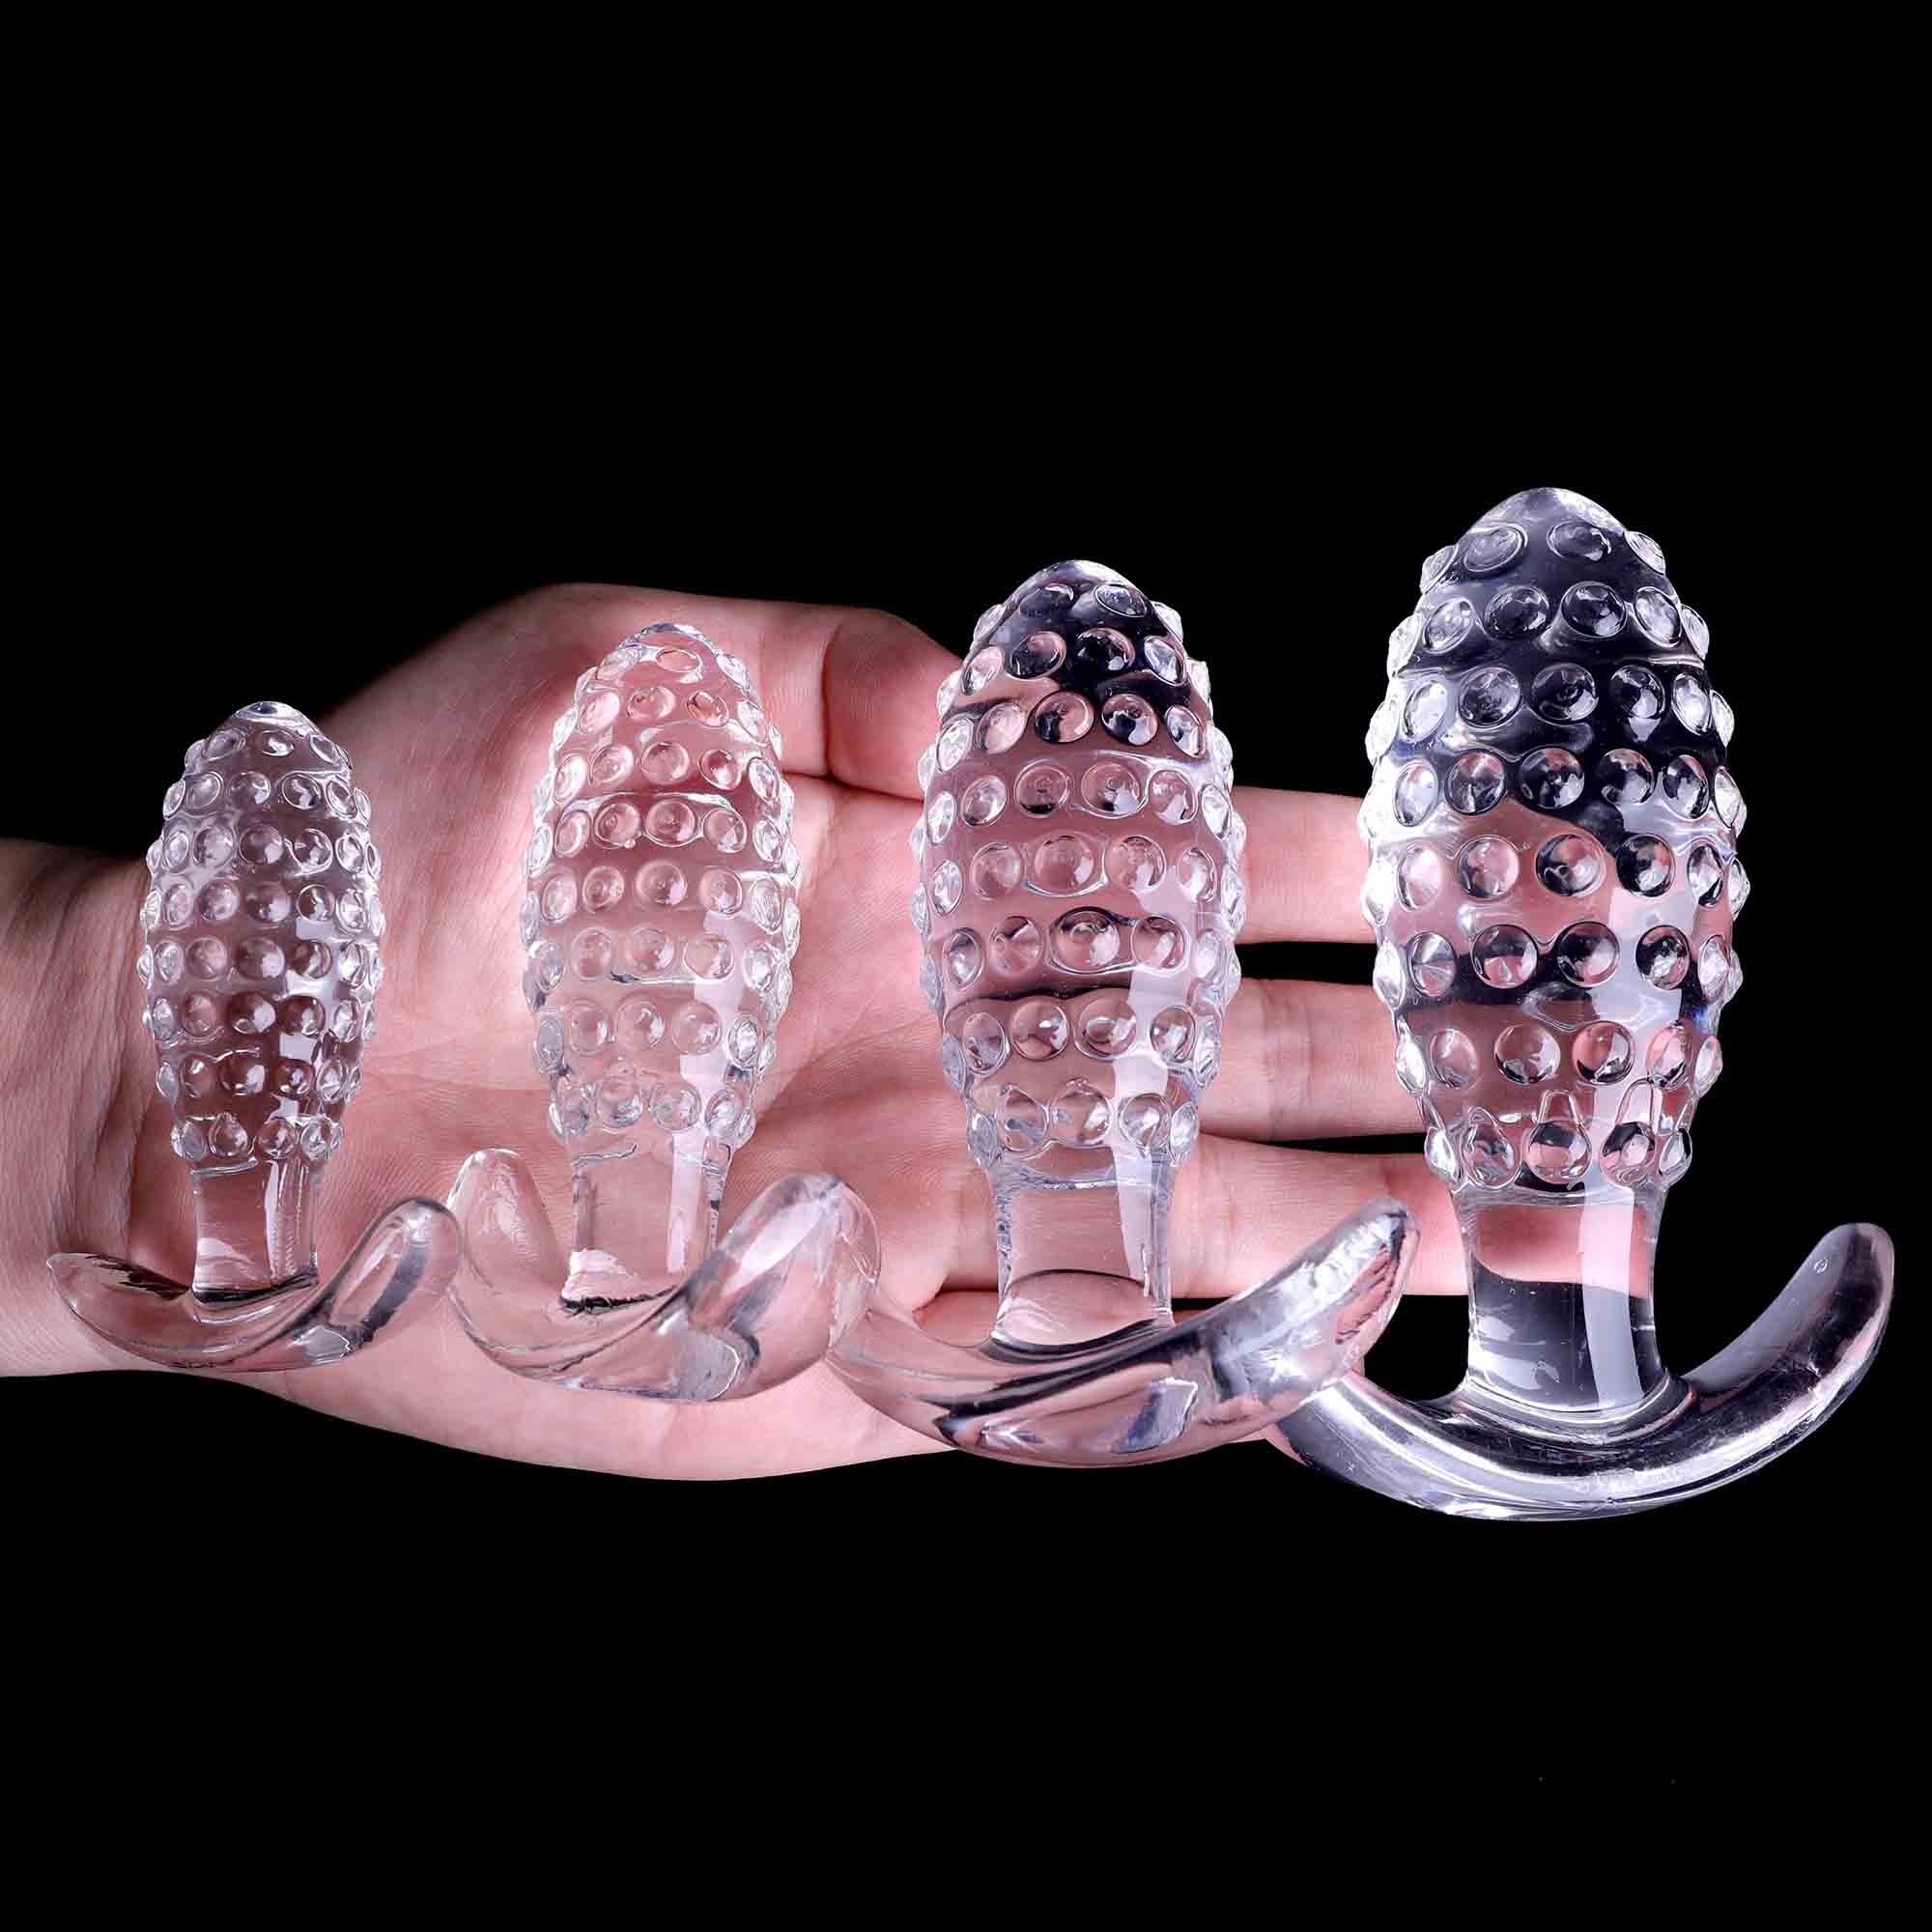 New Pineapple Anal Bead Jelly Anal Plug Particles Stimulate Butt Plug G-spot Prostate Massage Adult Sex Toy For Woman